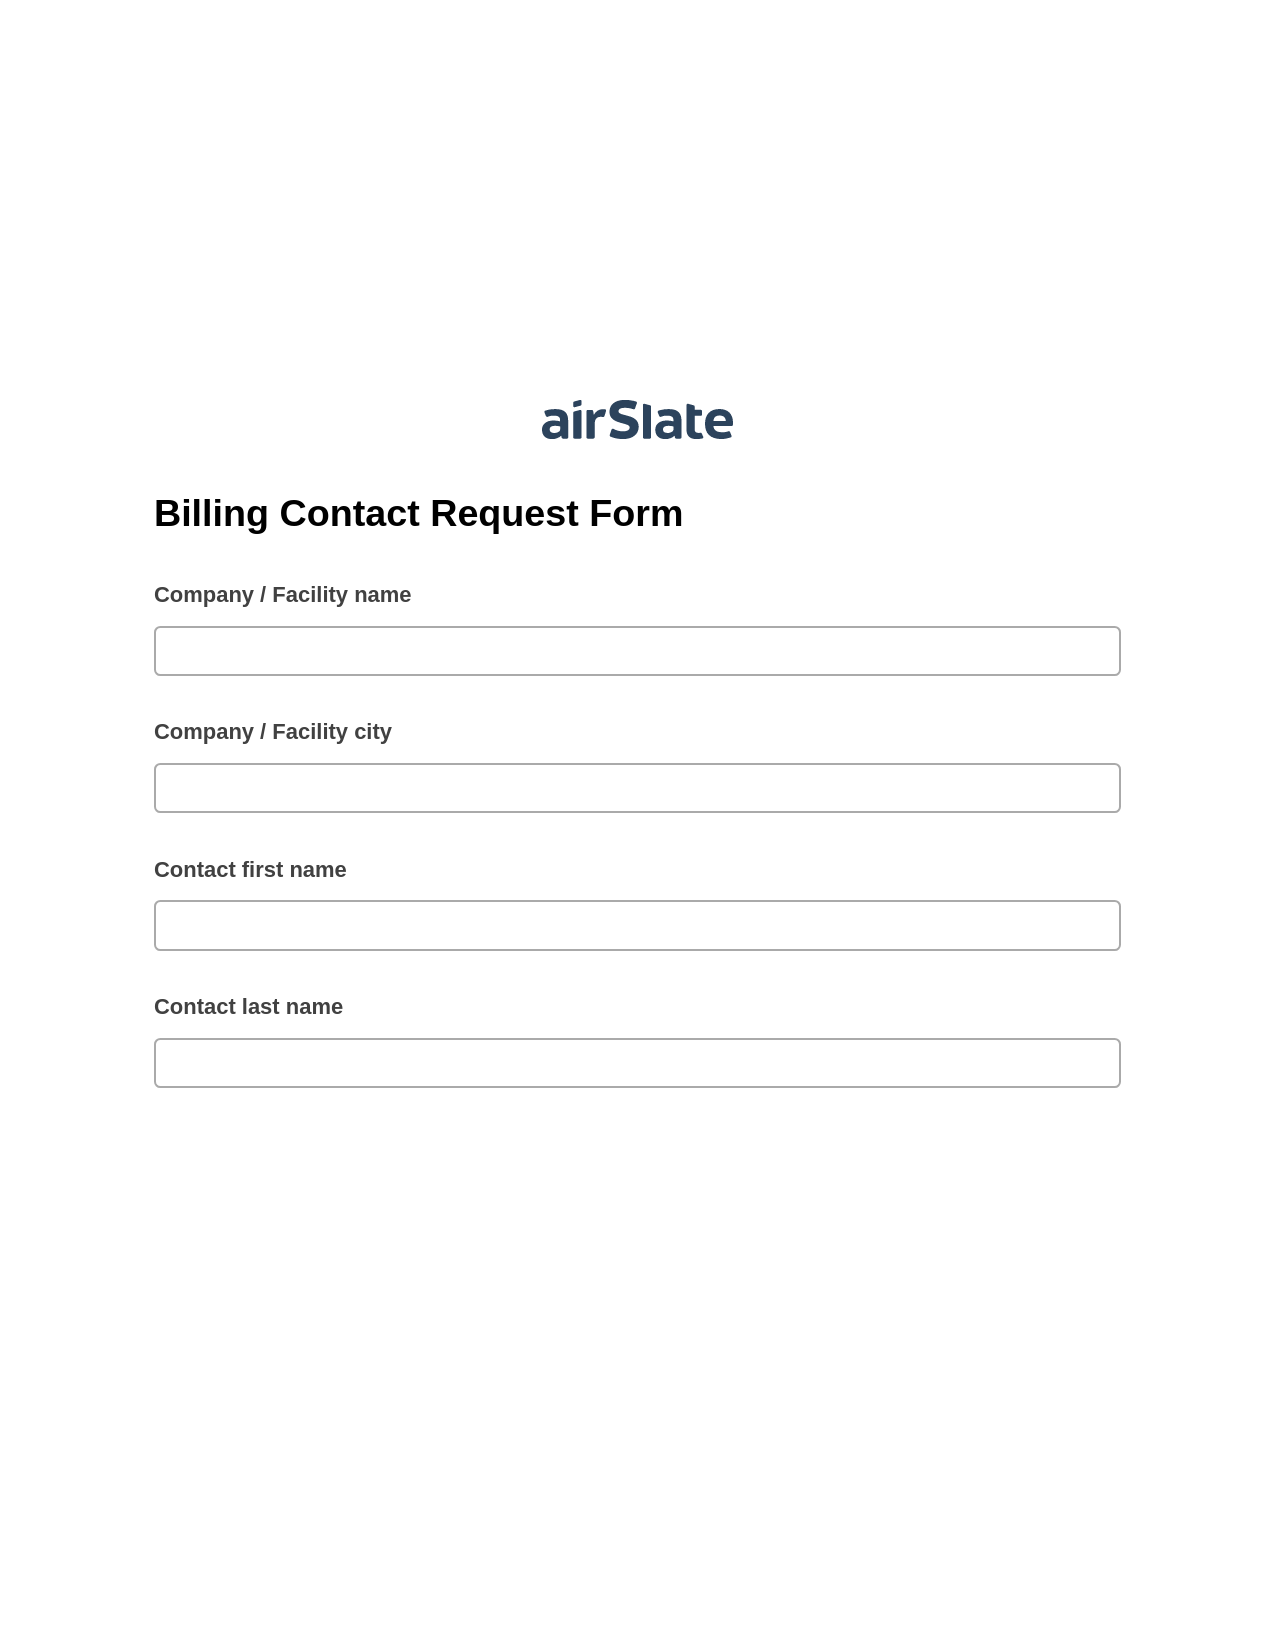 Multirole Billing Contact Request Form Pre-fill from CSV File Bot, Reminder Bot, Export to NetSuite Record Bot